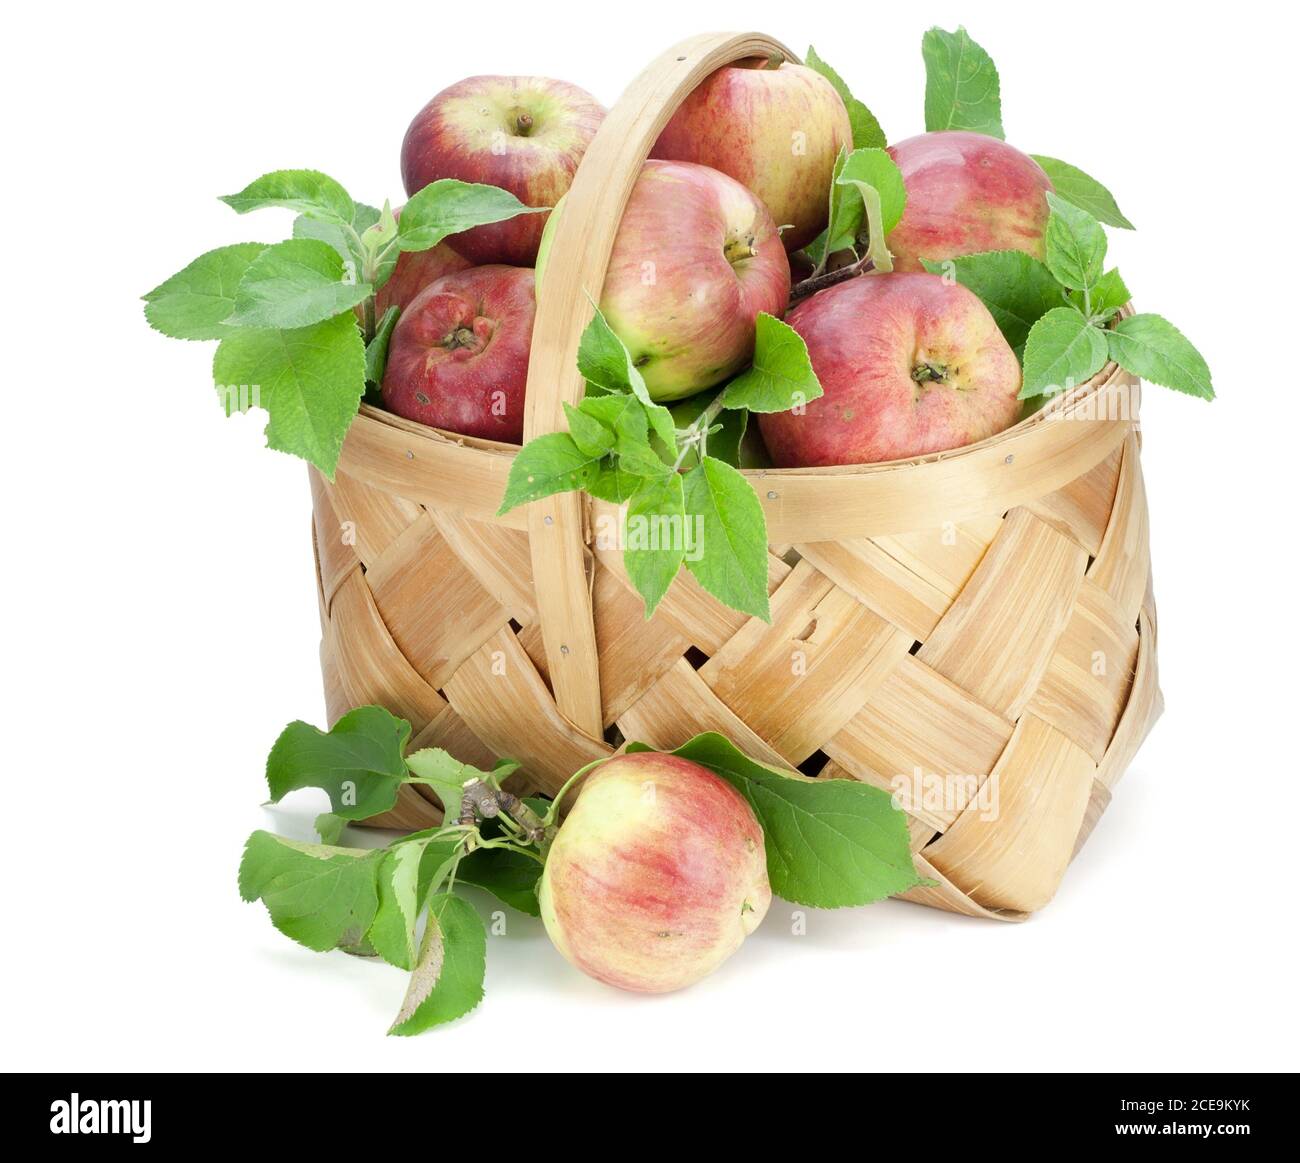 Apples with leaves in basket Stock Photo